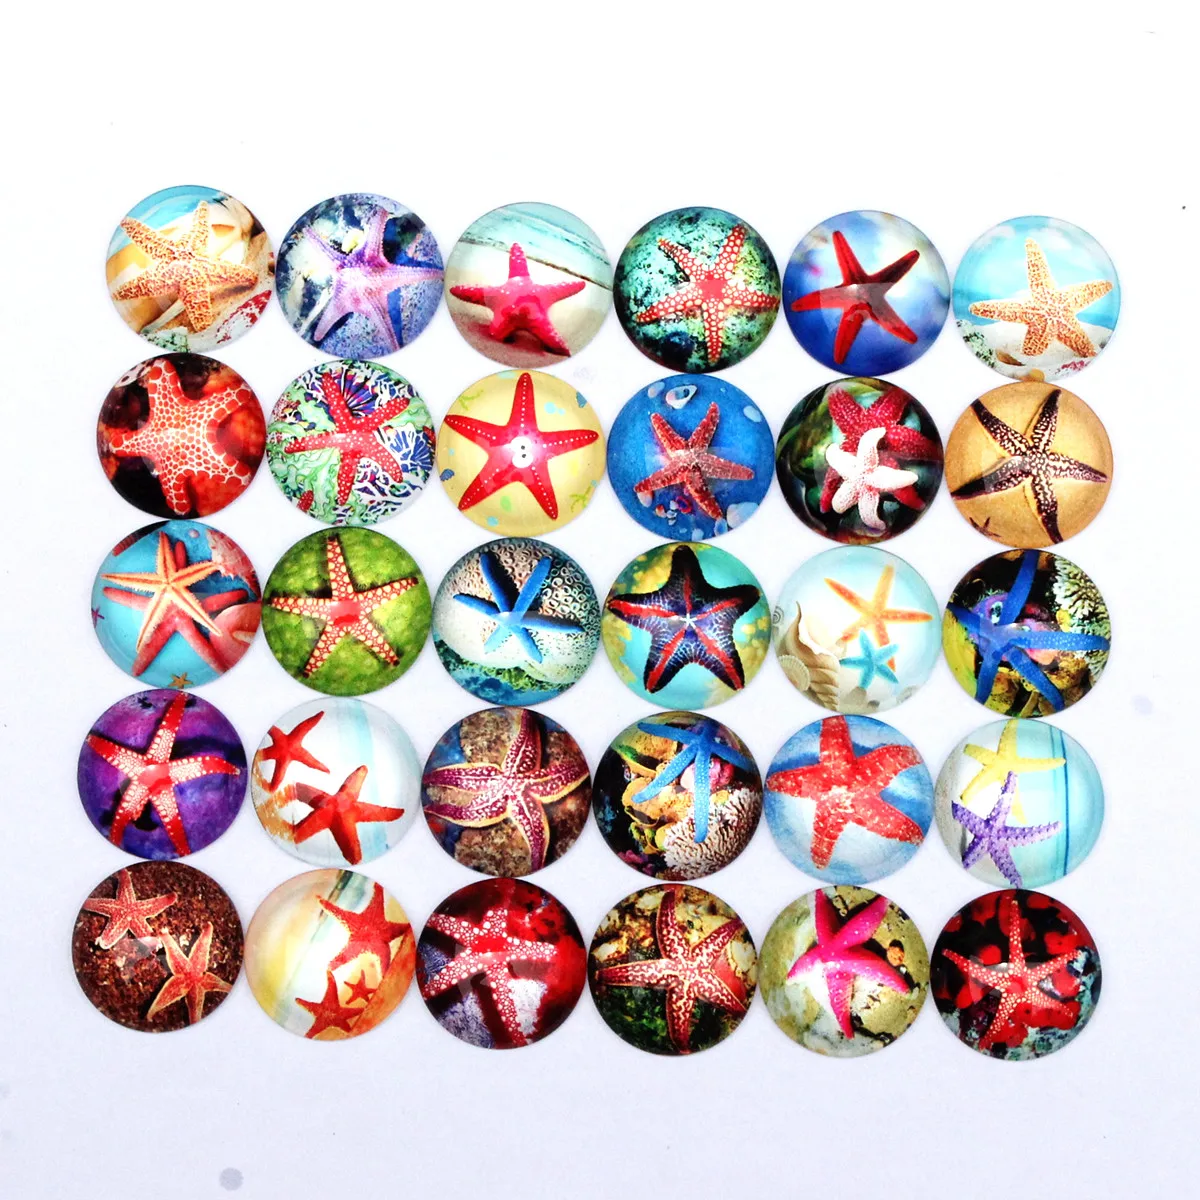 

From 8mm to 30mm Random Mixed Round Starfish Animal Cabochons Pattern Glass Flatback Photo Base DIY Making Accessories Paired